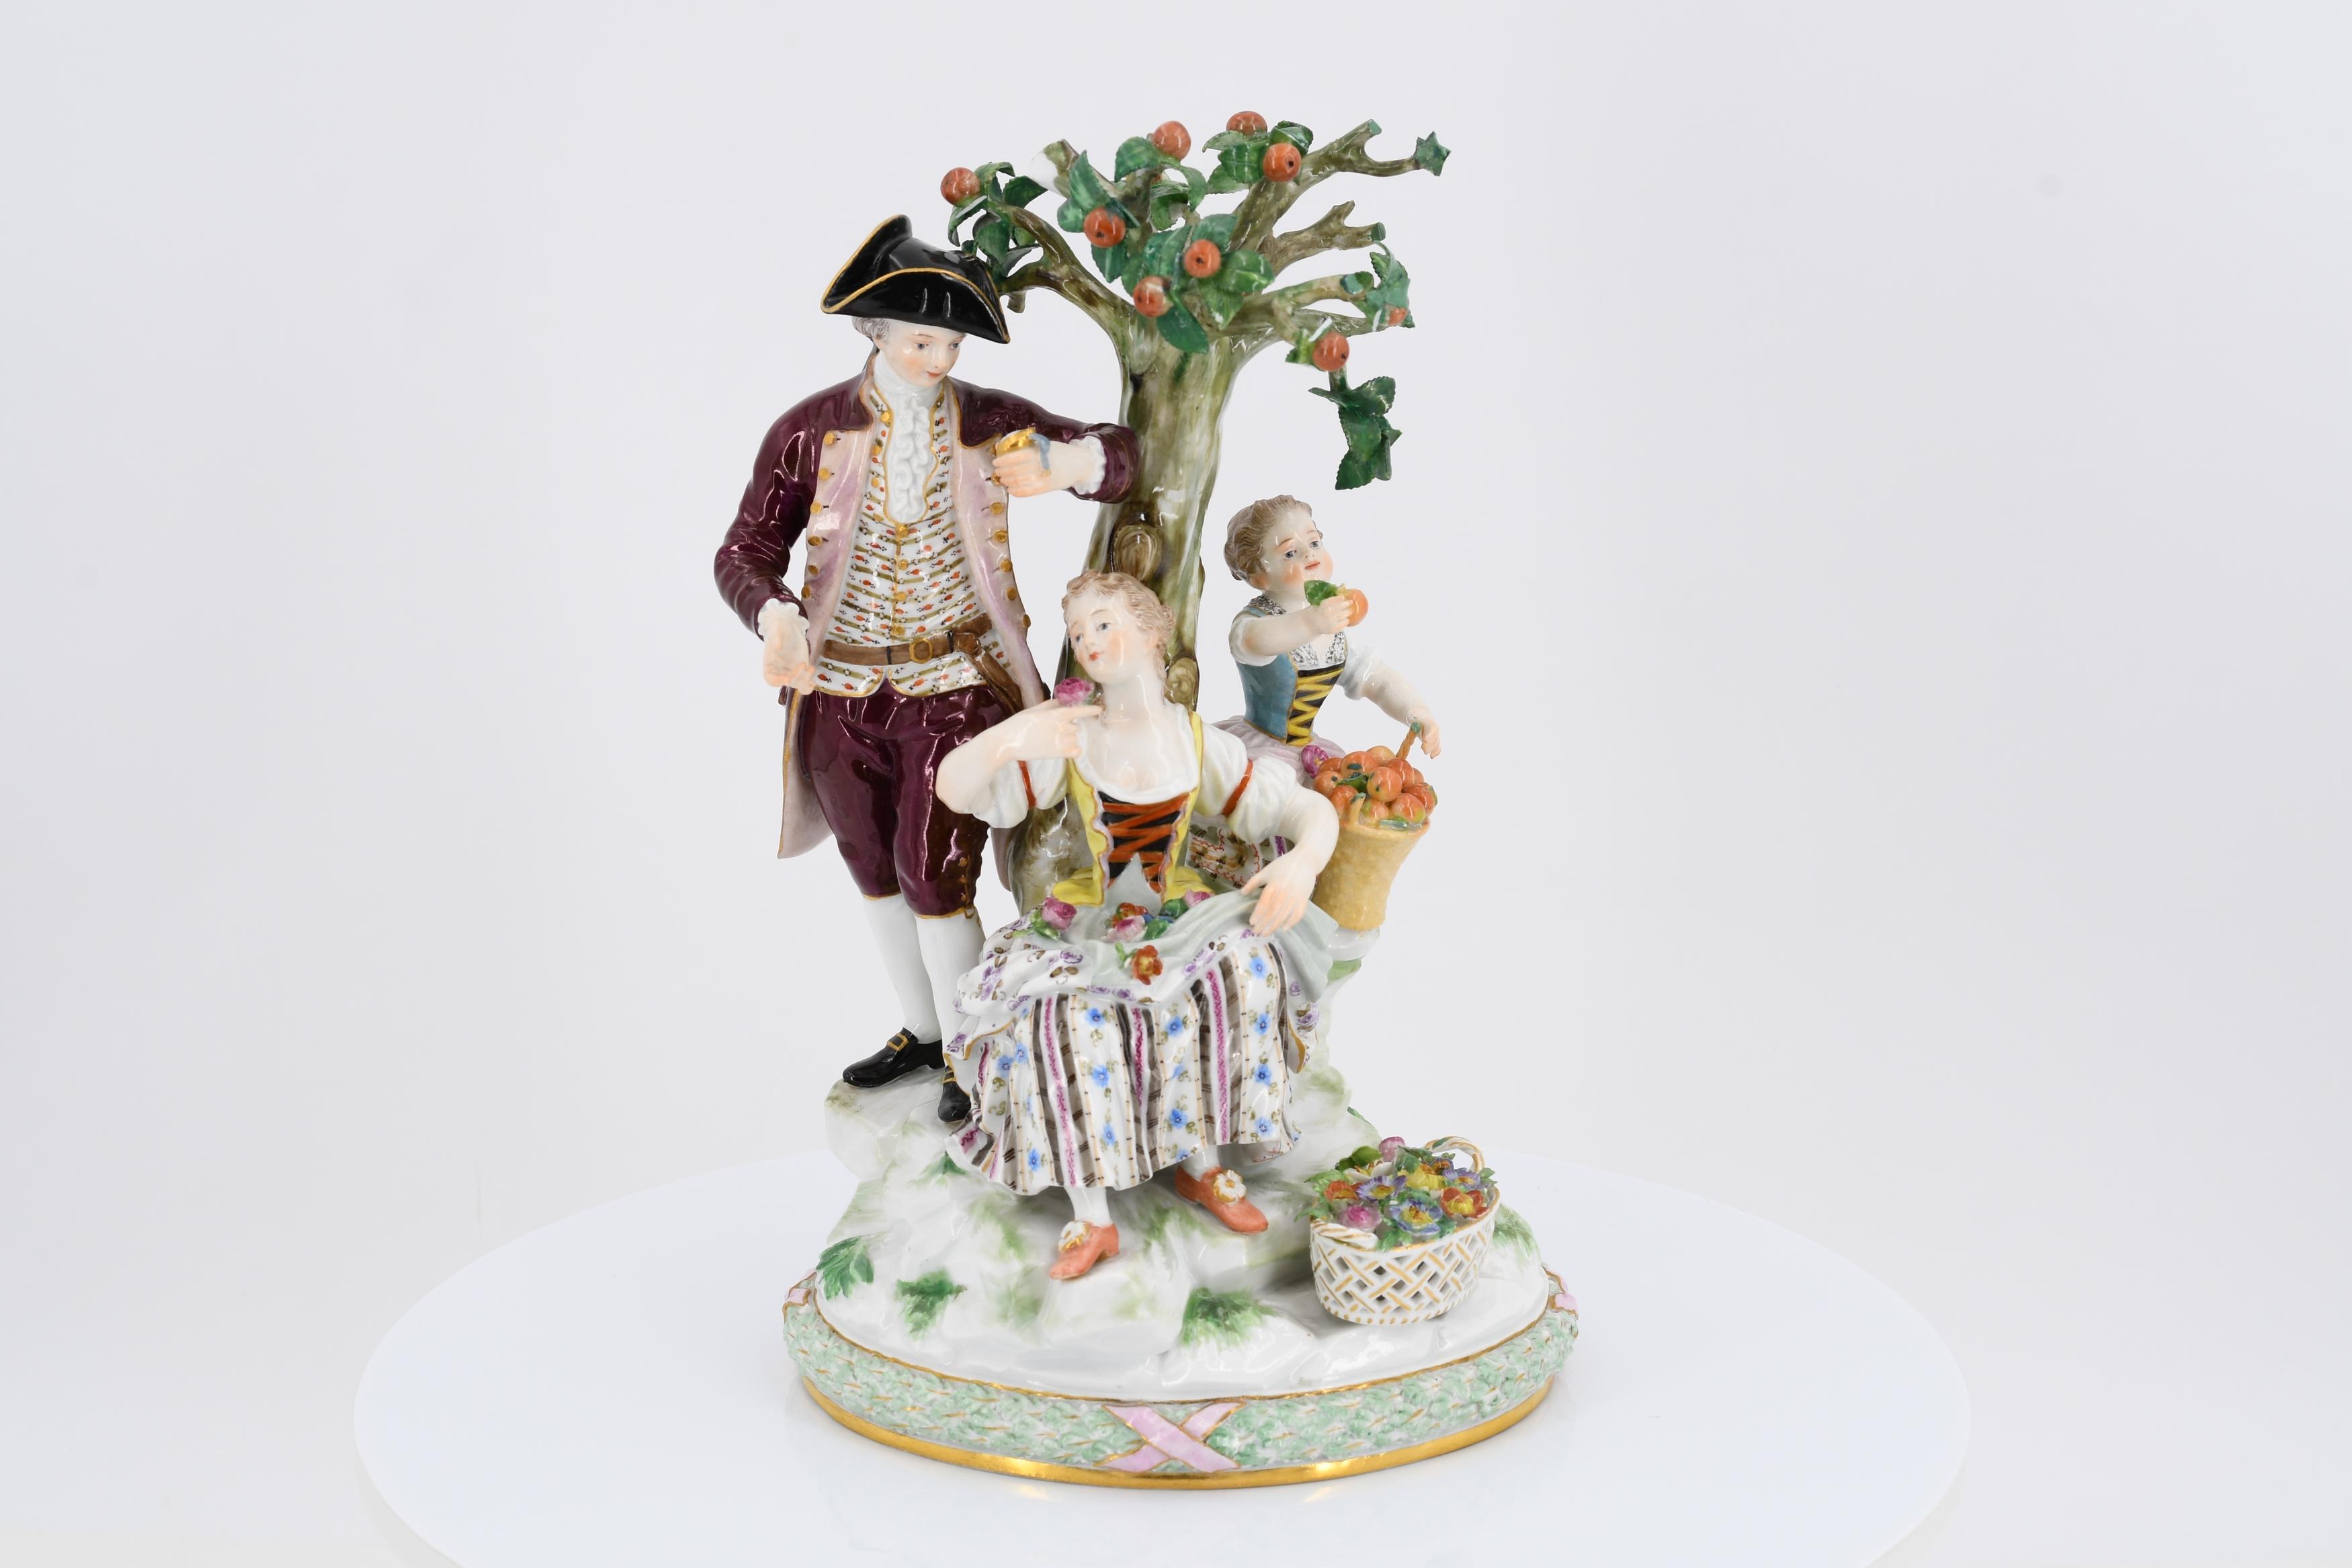 Porcelain ensemble of gardeners with an apple tree - Image 2 of 6